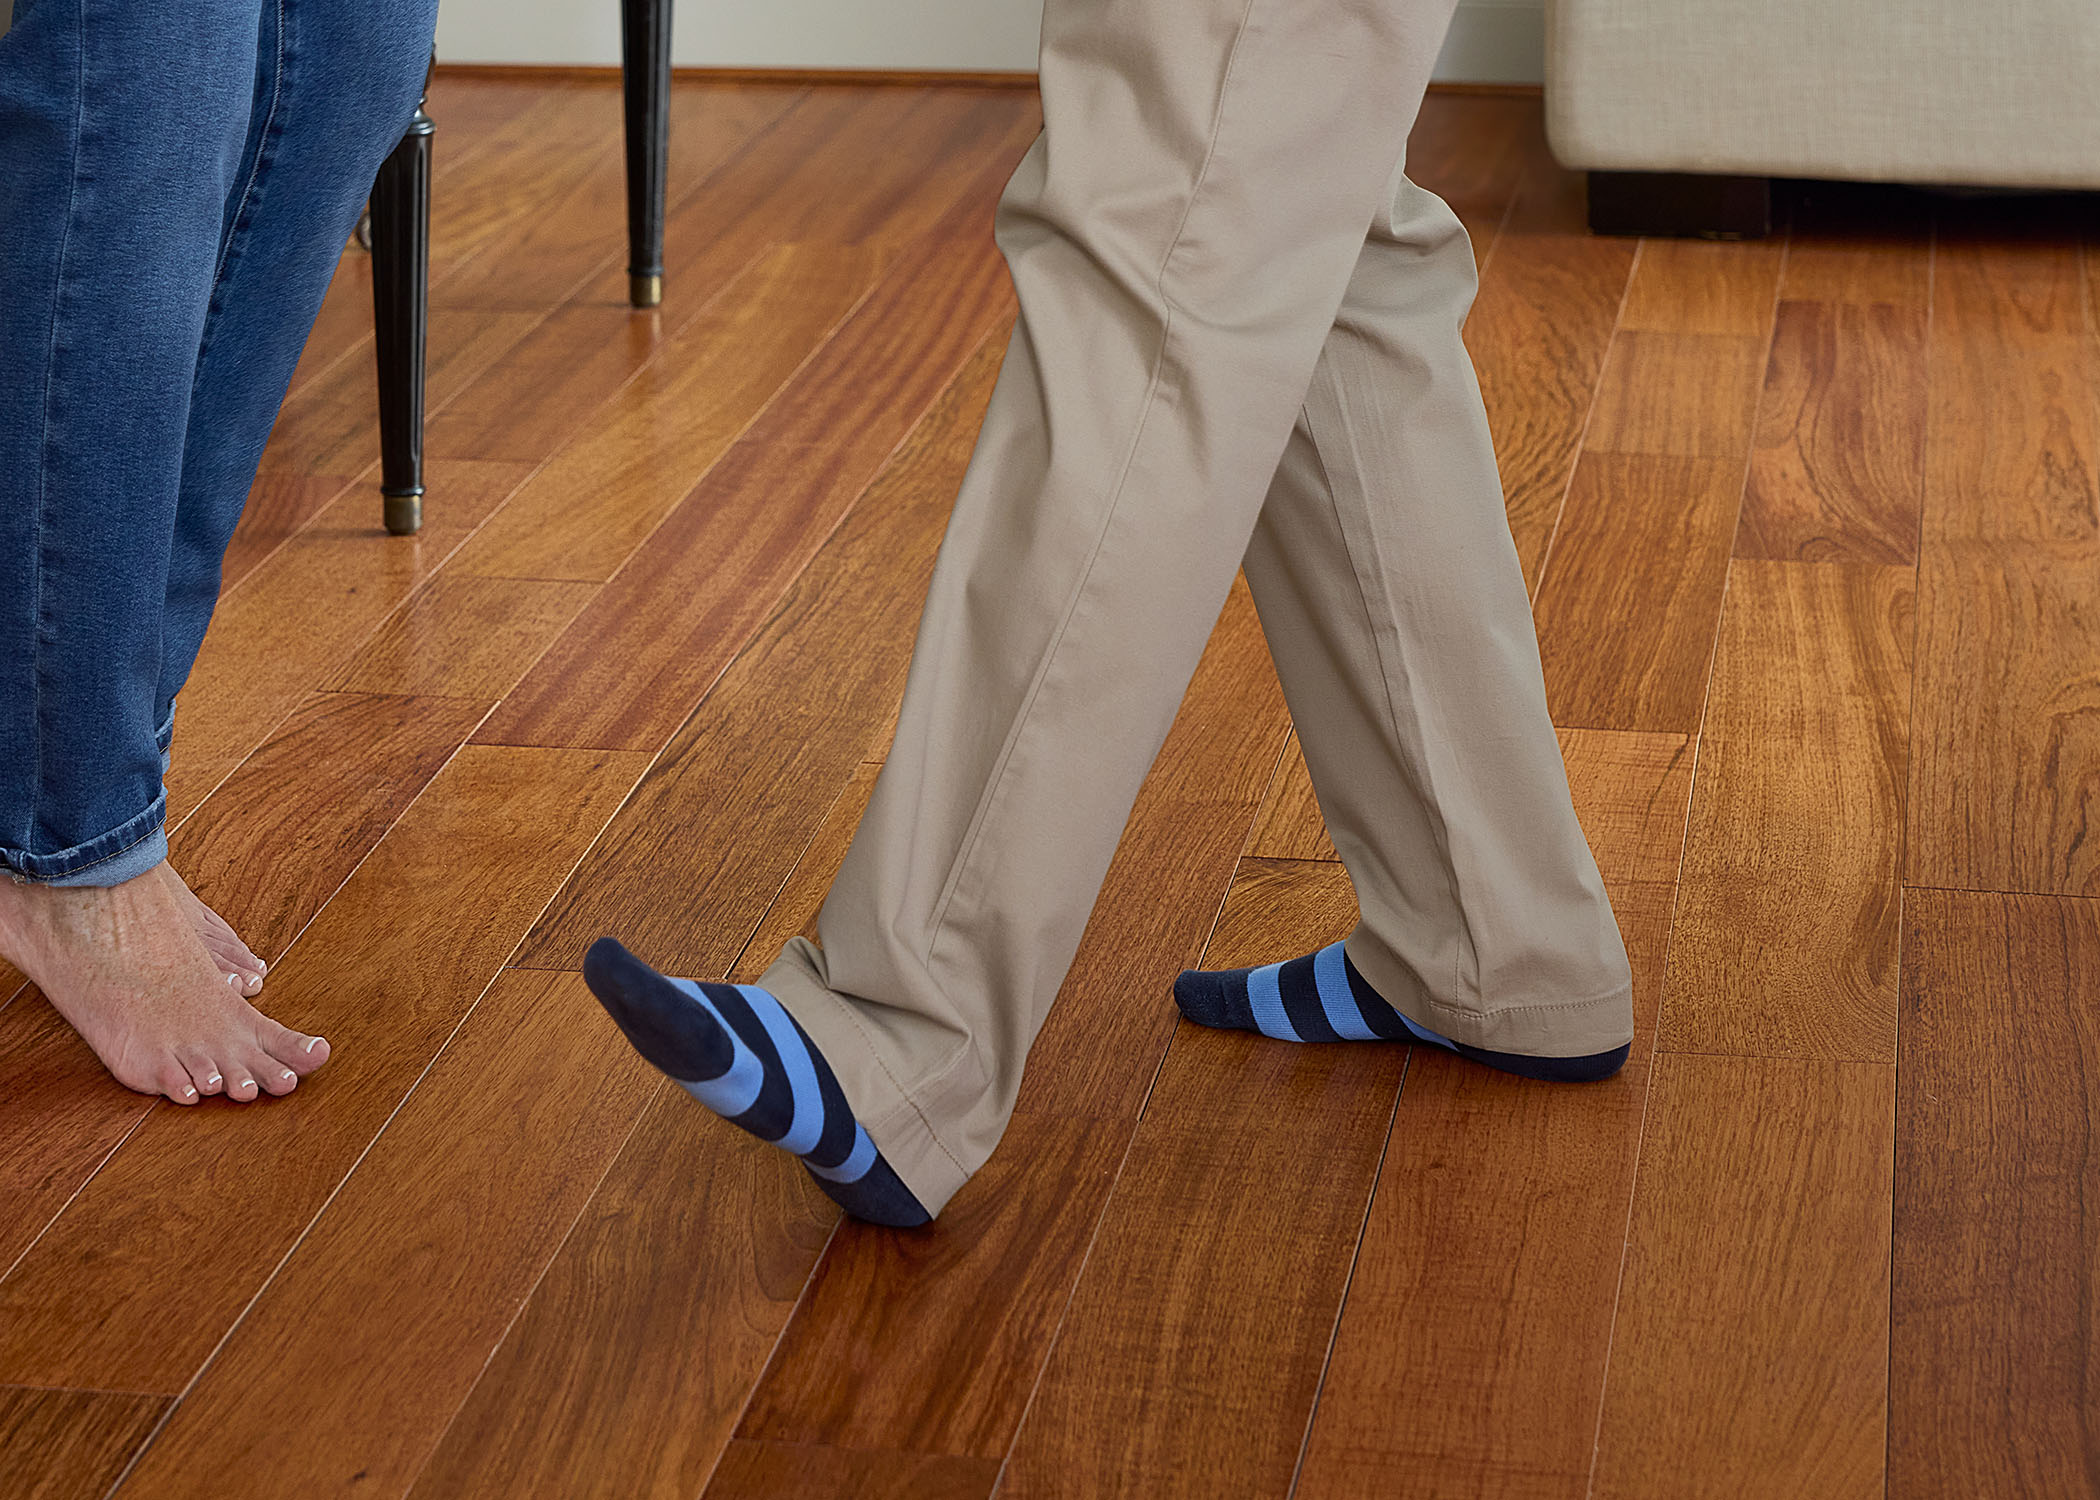 reddish brown solid hardwood floor with closeup of two people dancing on floor with one person wearing blue striped socks and the other barefoot